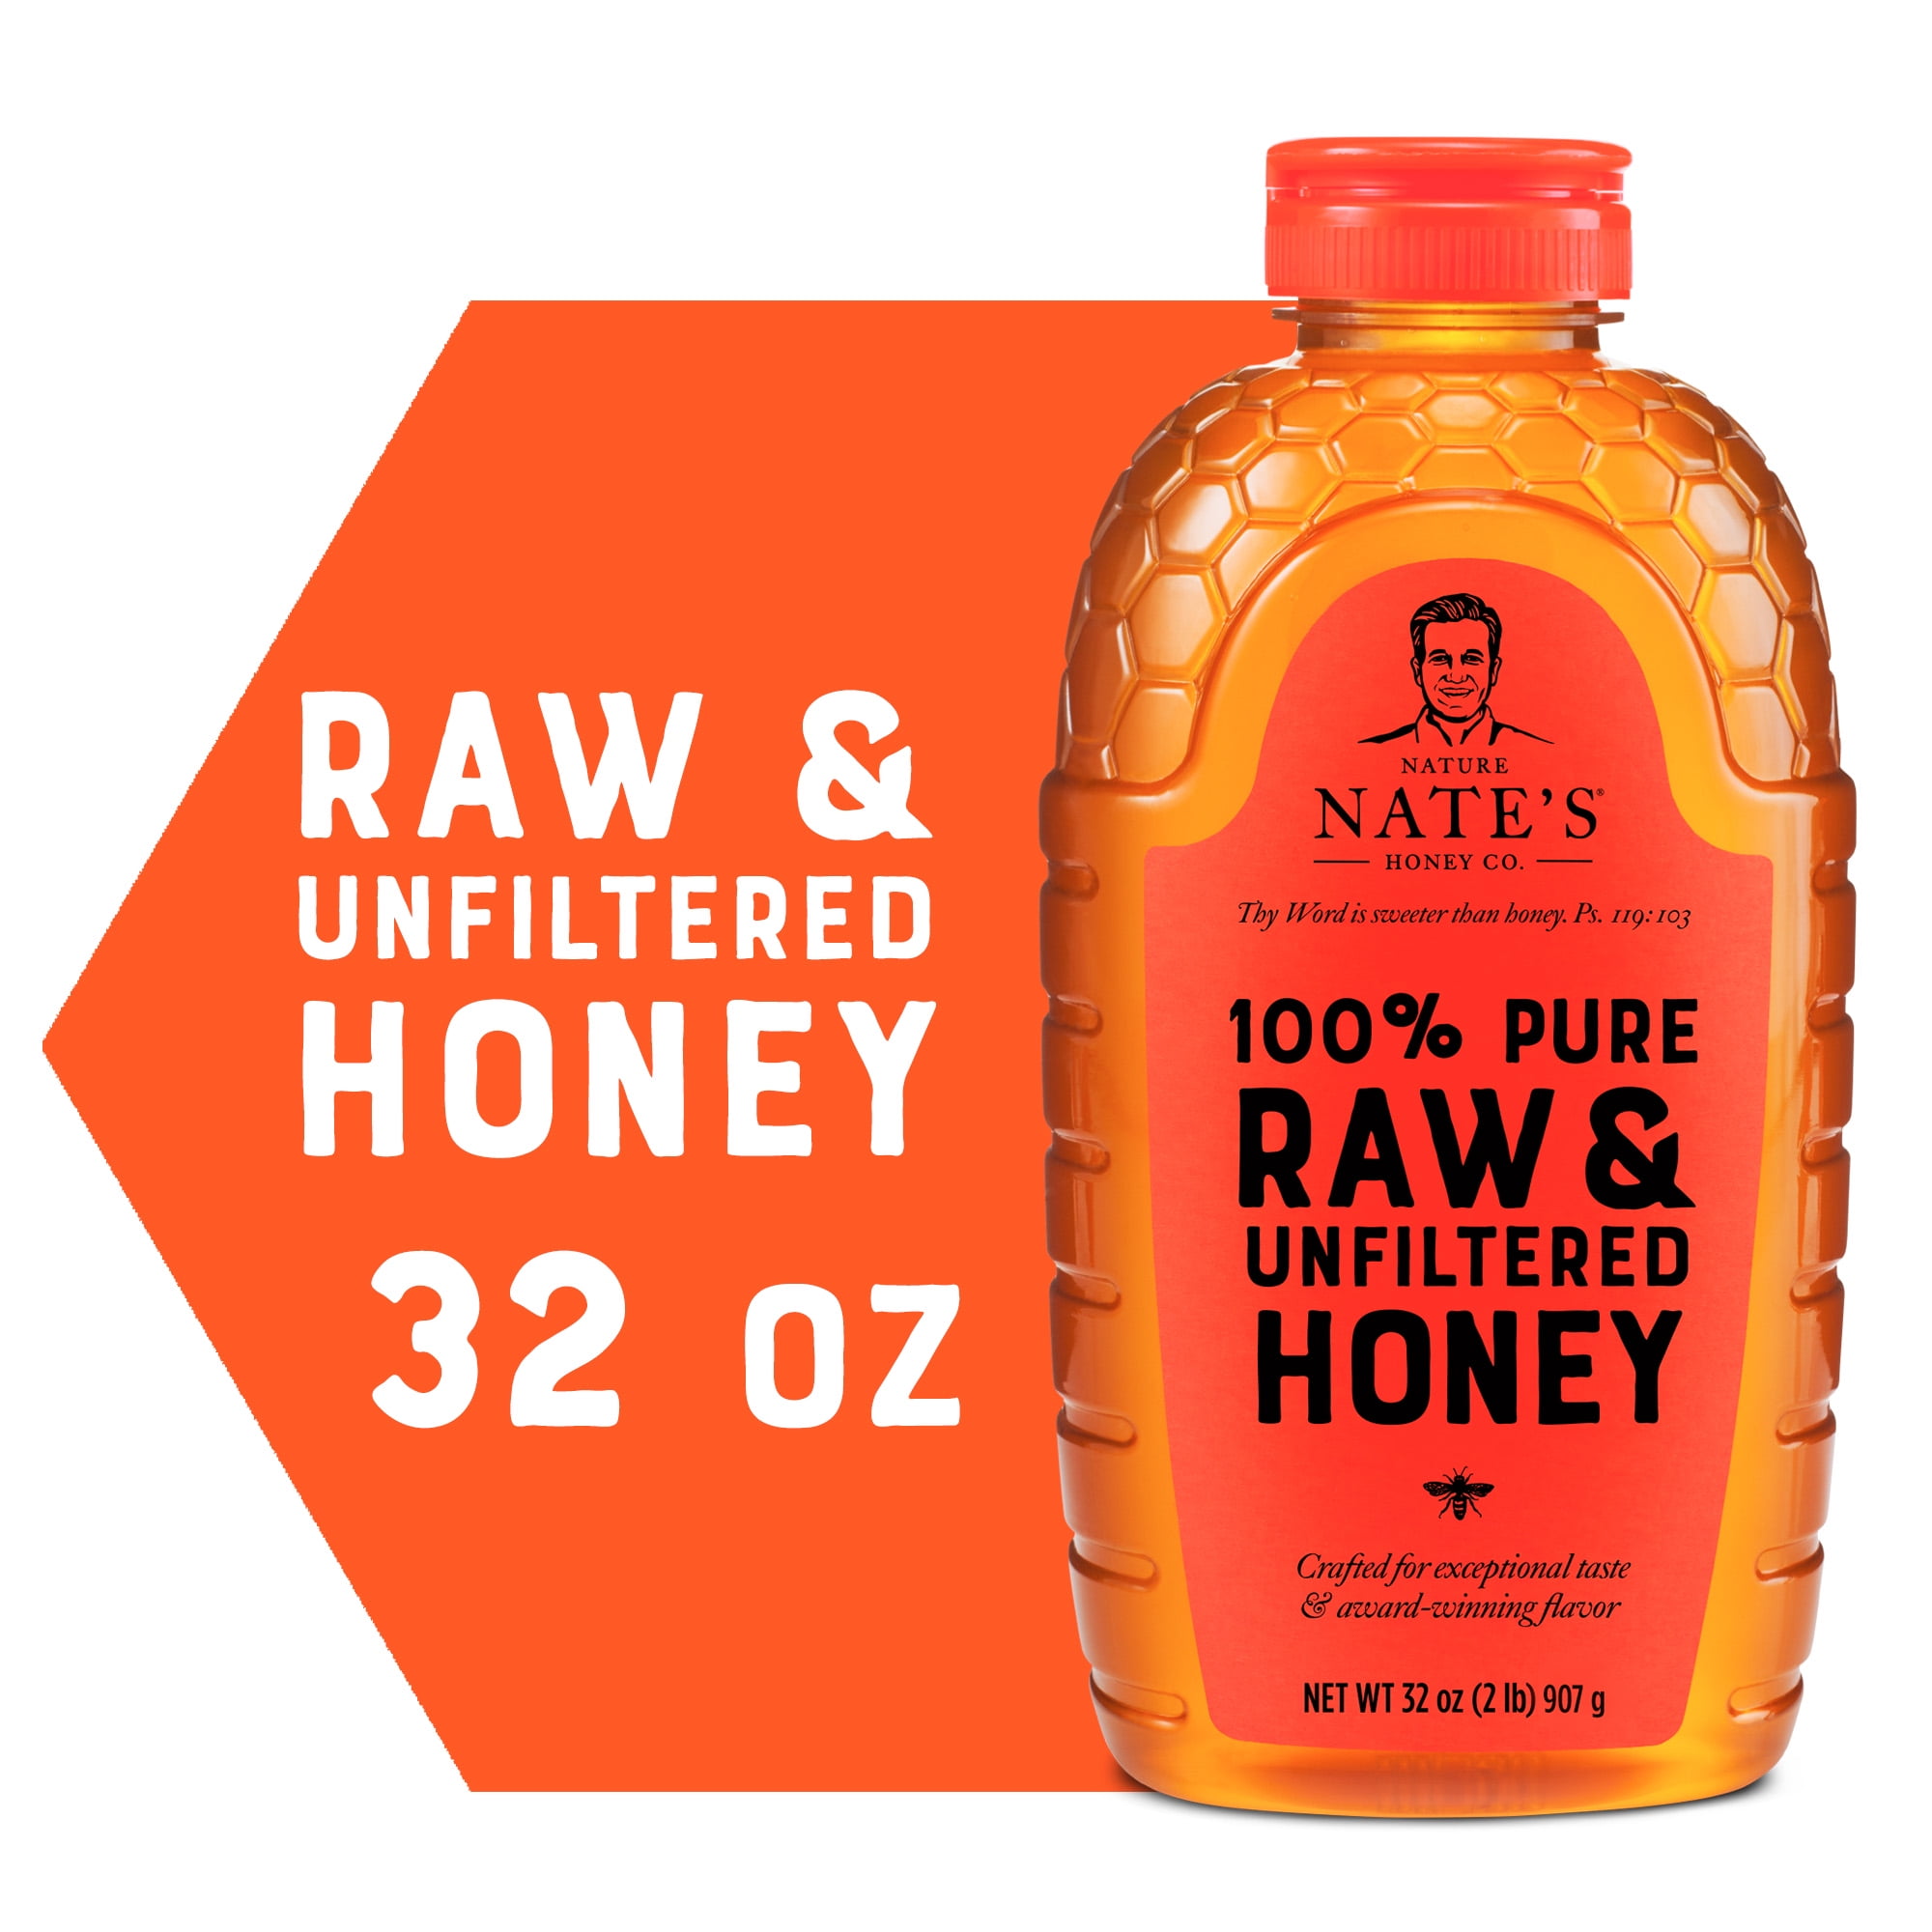 Nature Nate's Honey: 100% Pure, Raw and Unfiltered Honey - 32 fl oz